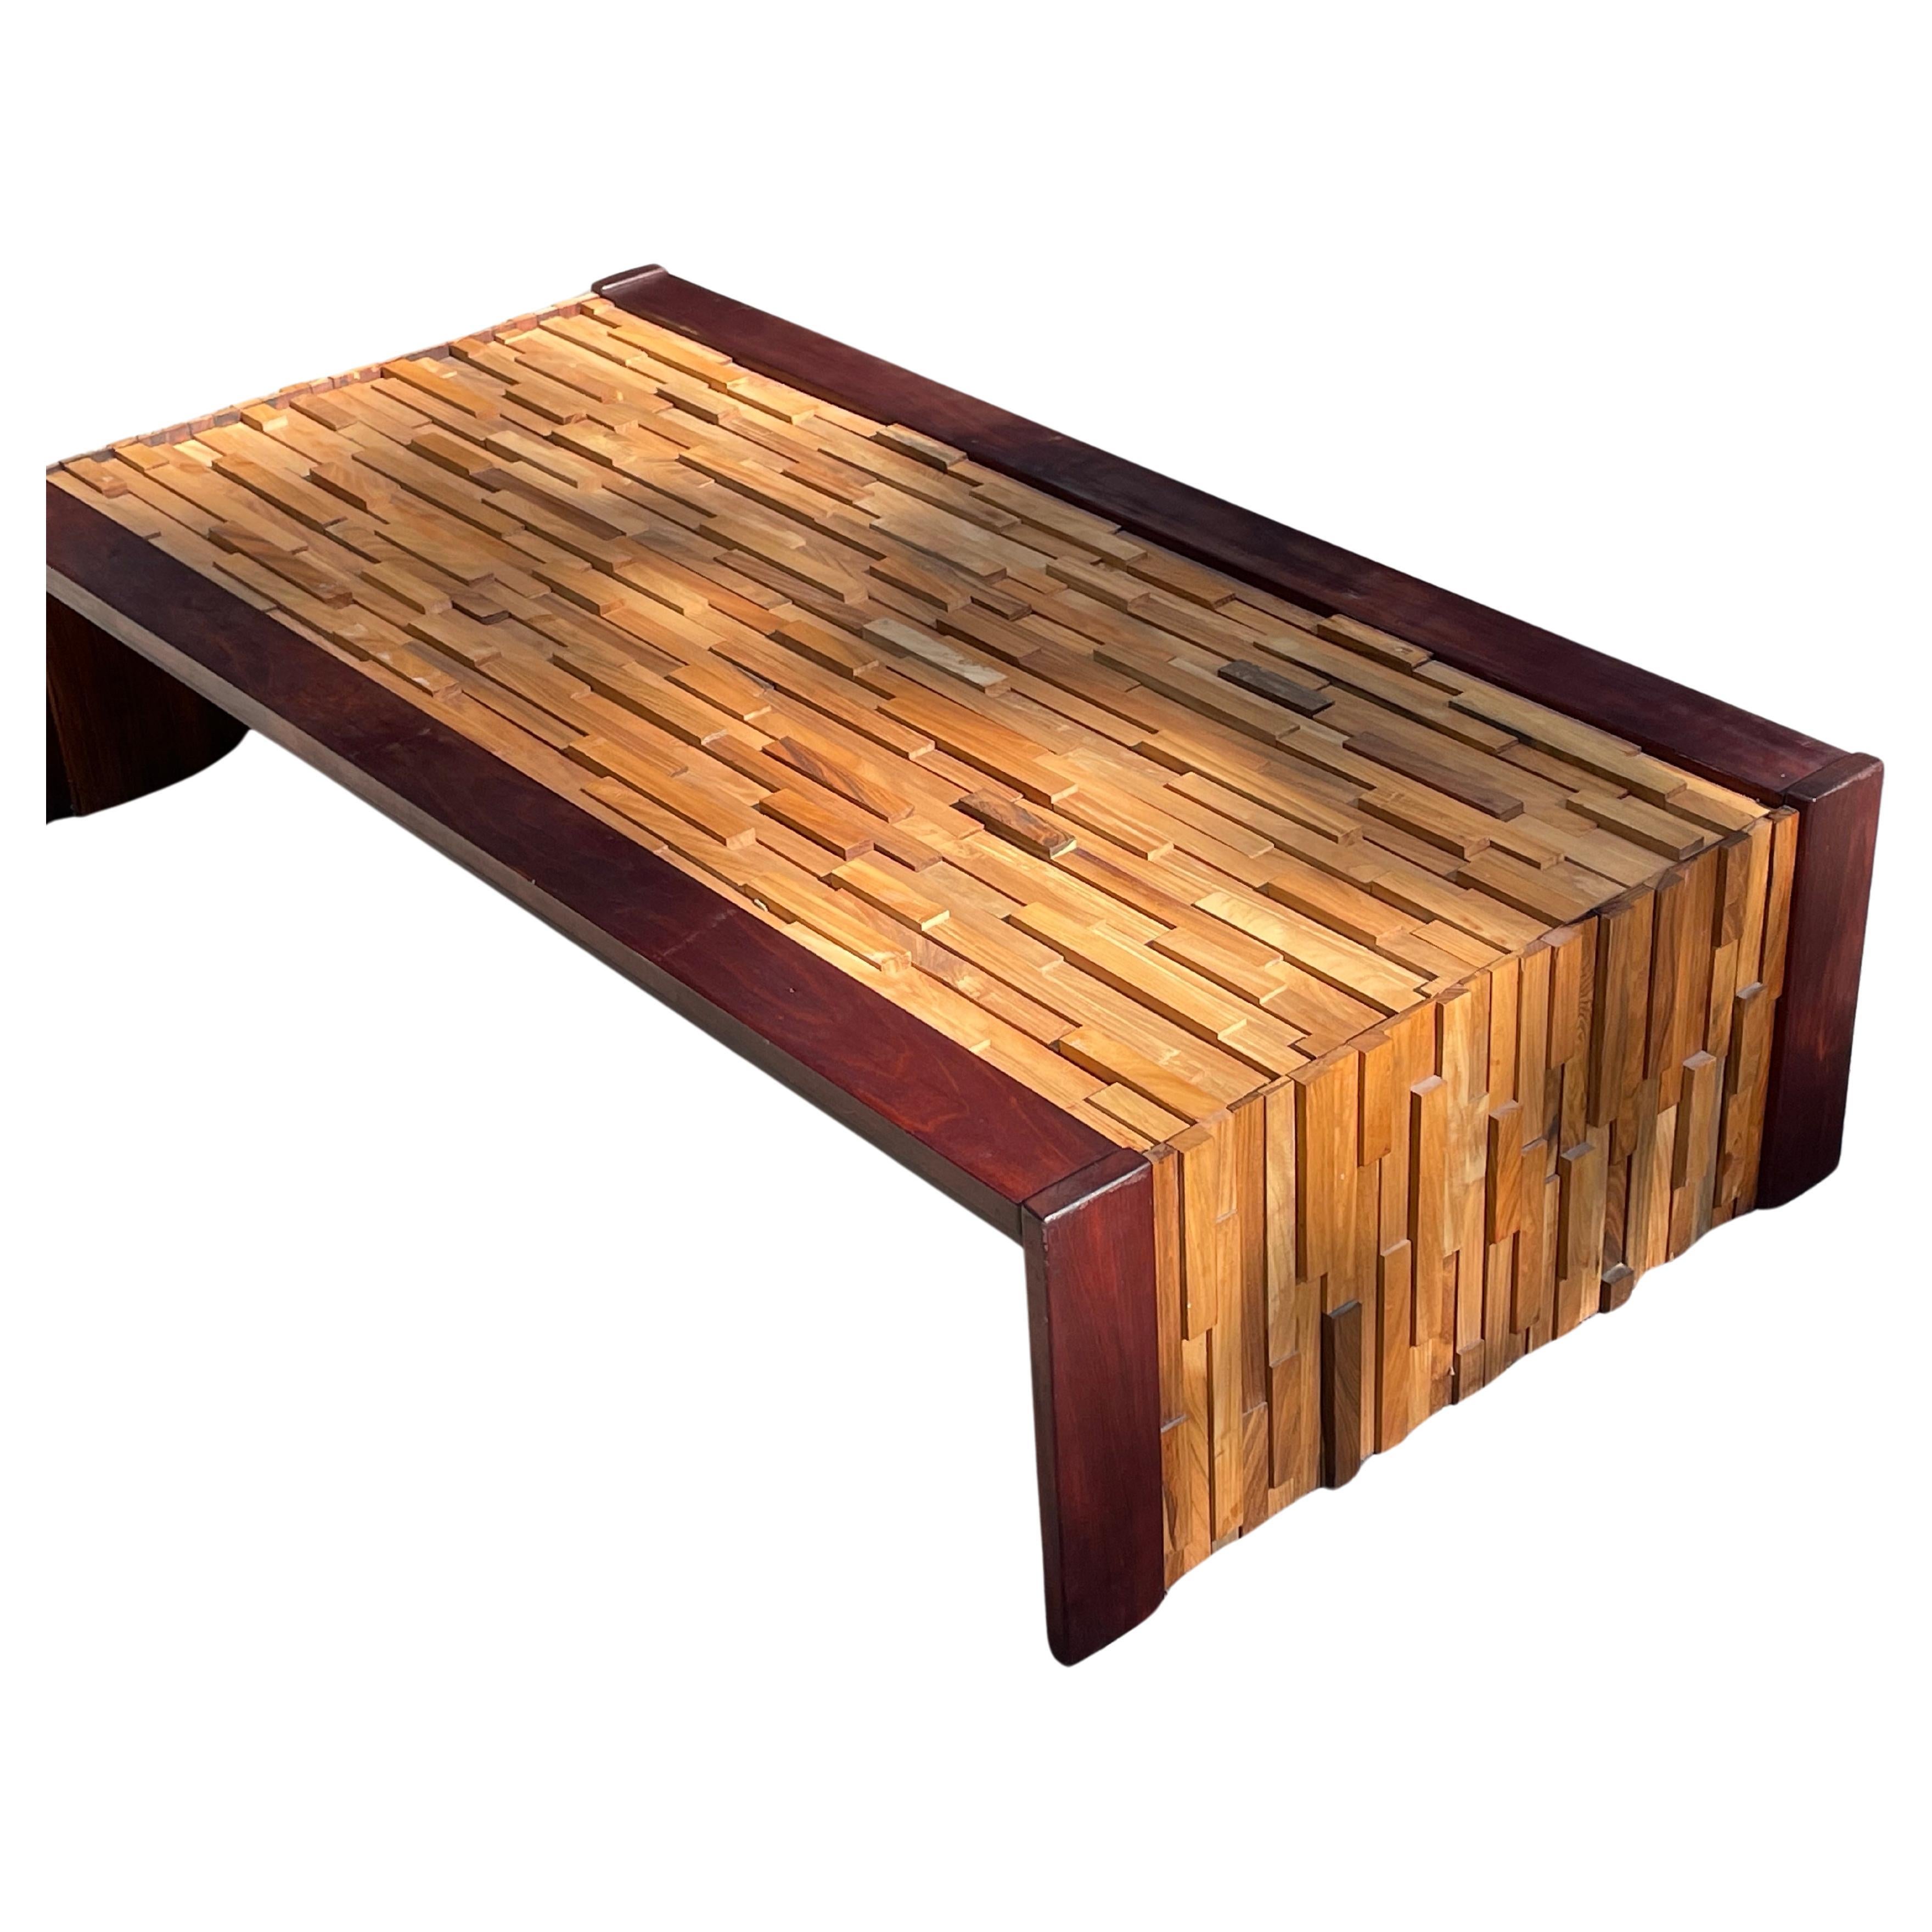 This iconic coffee table is one of Lafer's most famous designs and was made of various tropical hardwood including rosewood, teak and jacaranda in different heights and lengths to create a brutalist design. 

It's also easy to set up anywhere in